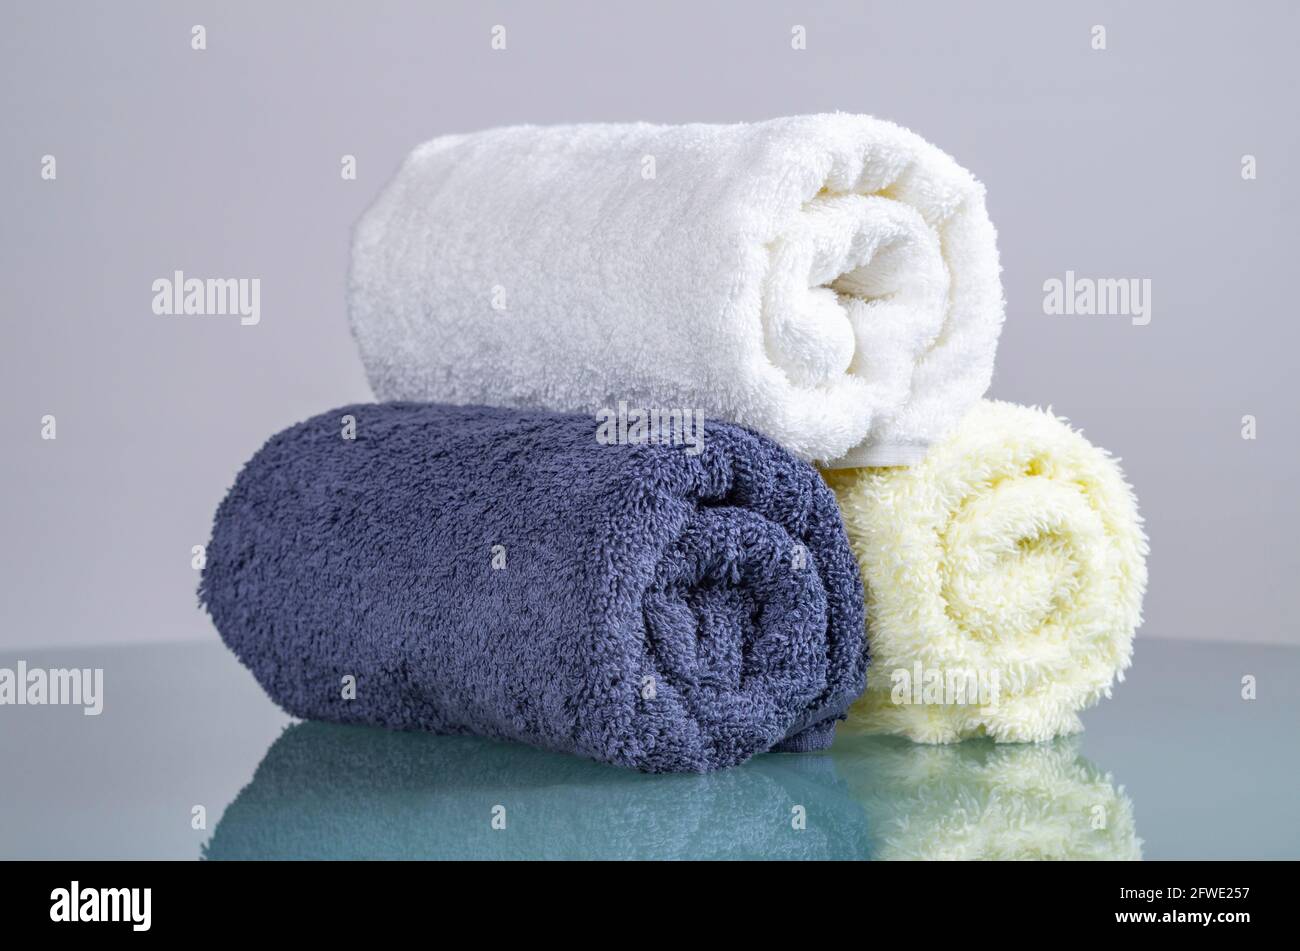 https://c8.alamy.com/comp/2FWE257/towels-close-up-of-rolled-white-and-blue-fluffy-towels-beauty-and-massage-spa-concept-luxury-hotel-2FWE257.jpg